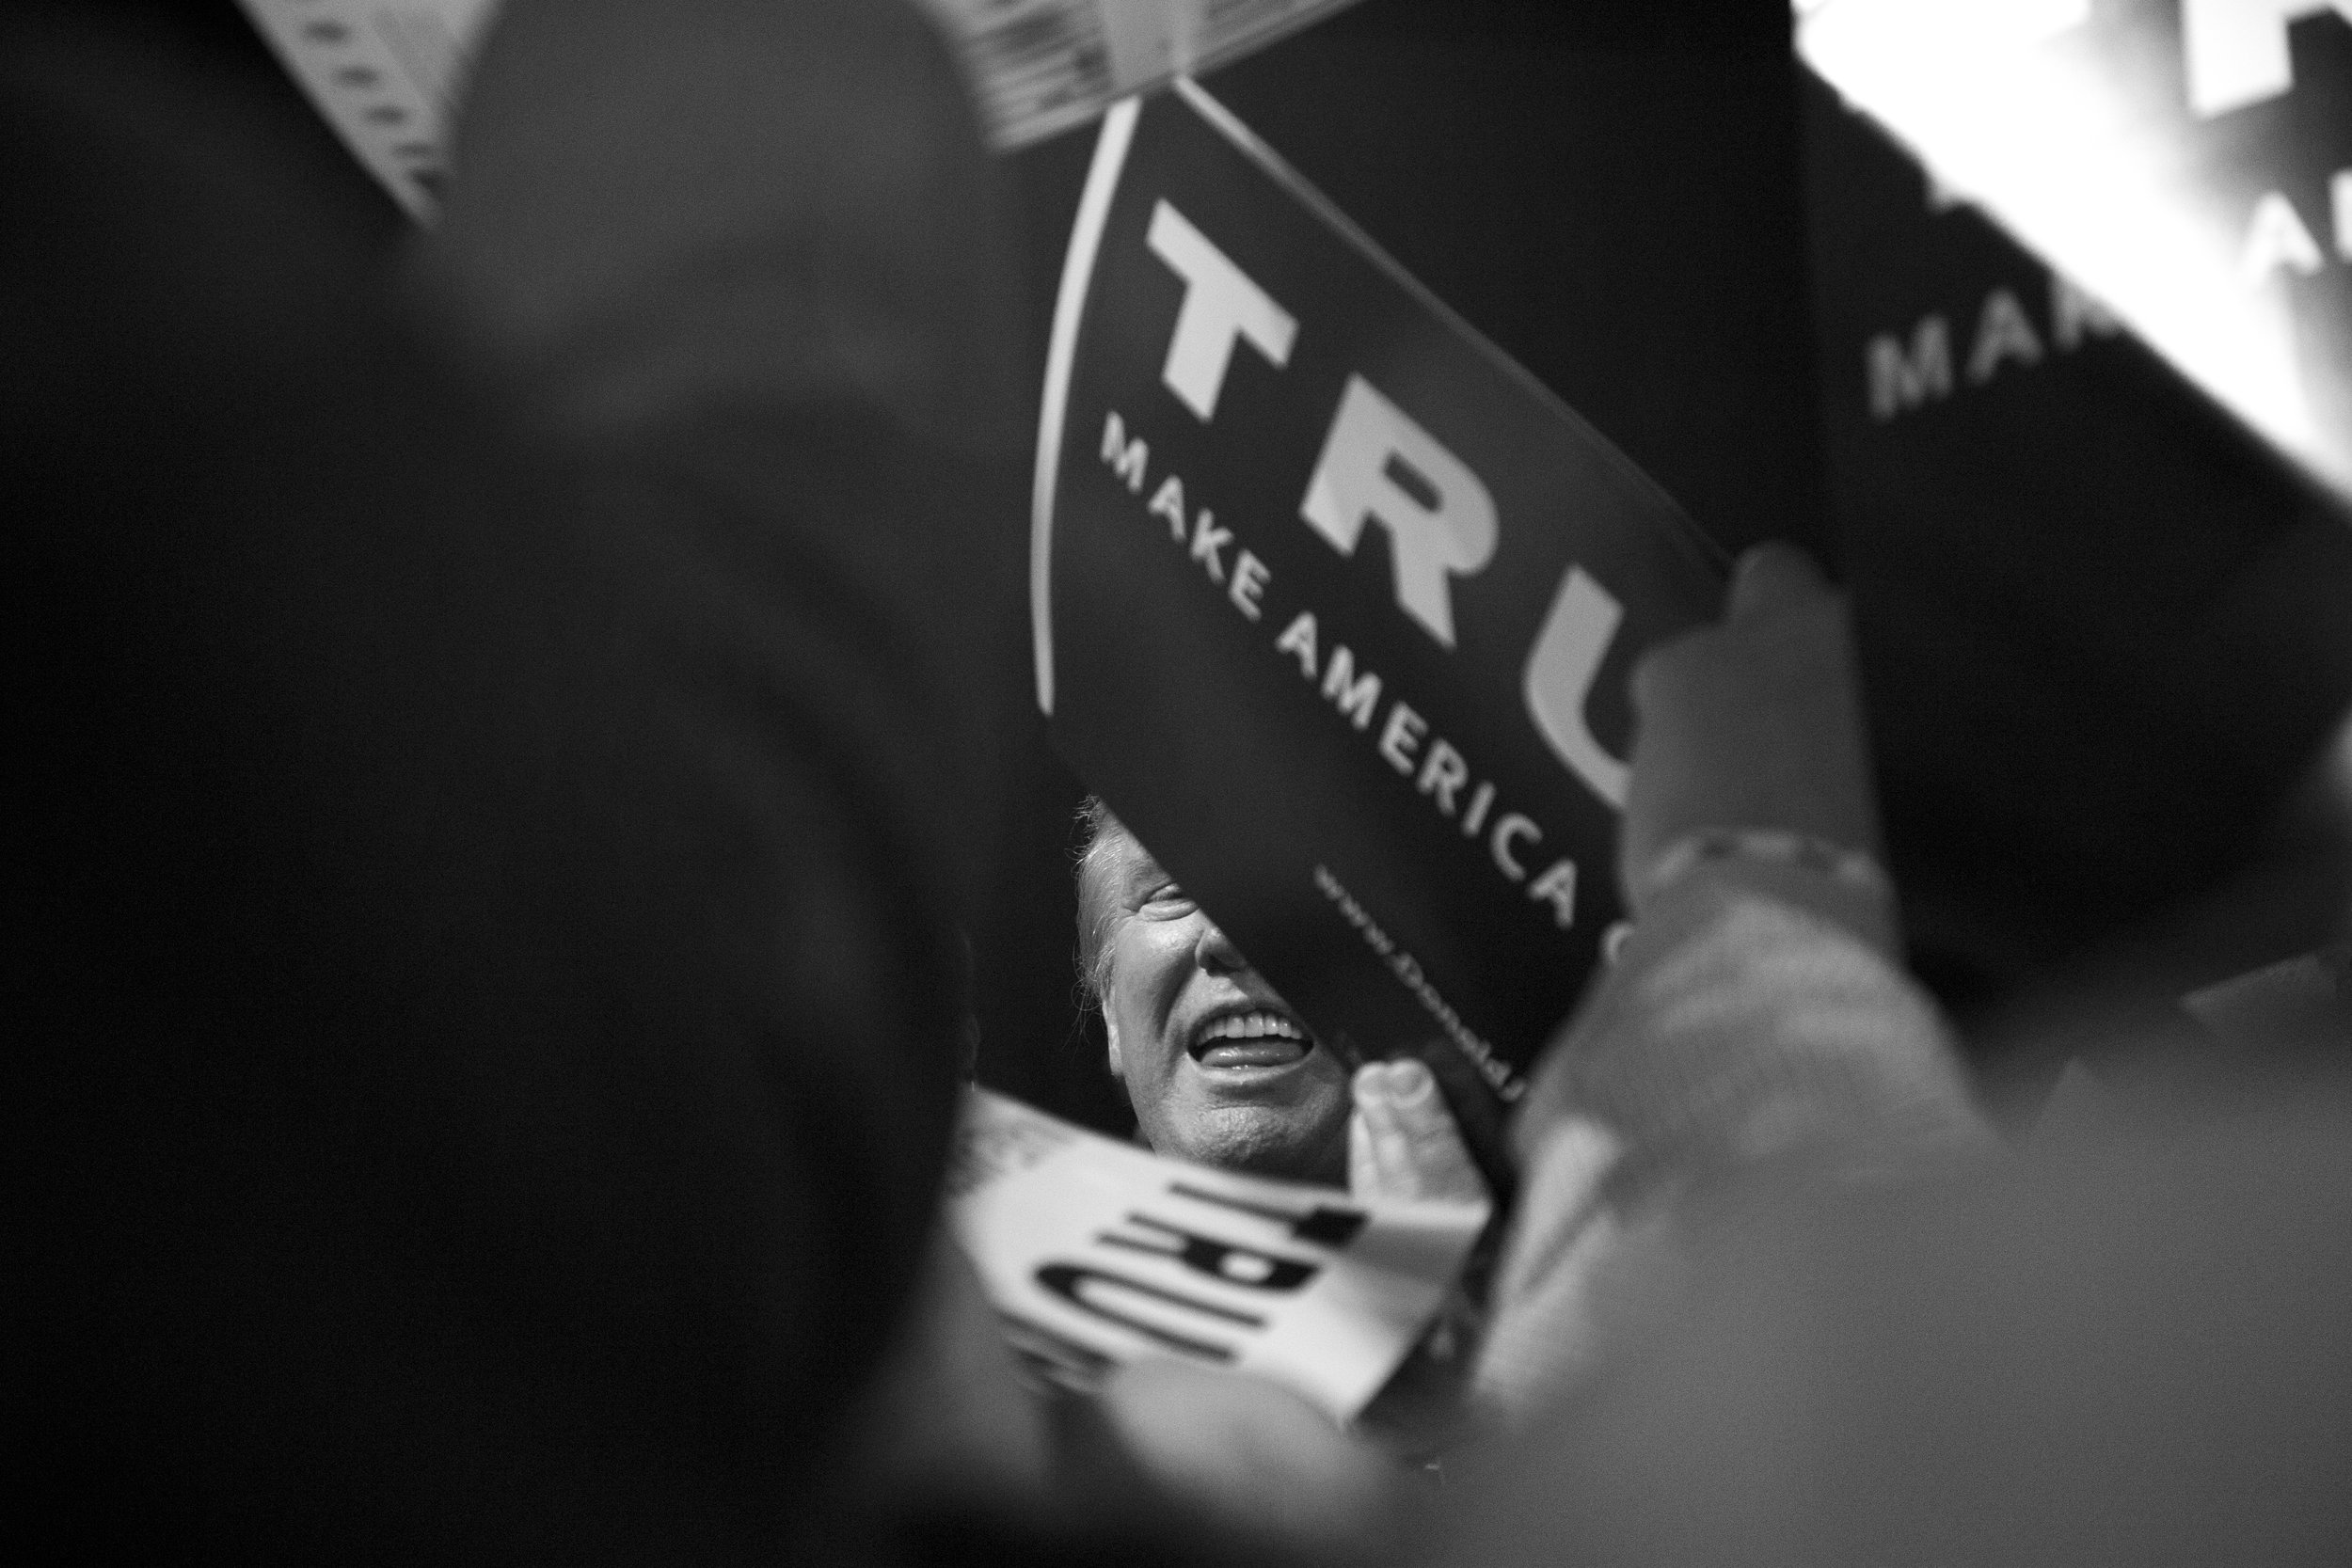  Republican presidential nominee Donald Trump shakes hands with supporters after he spoke on June 18, 2016 in Phoenix, Arizona. 